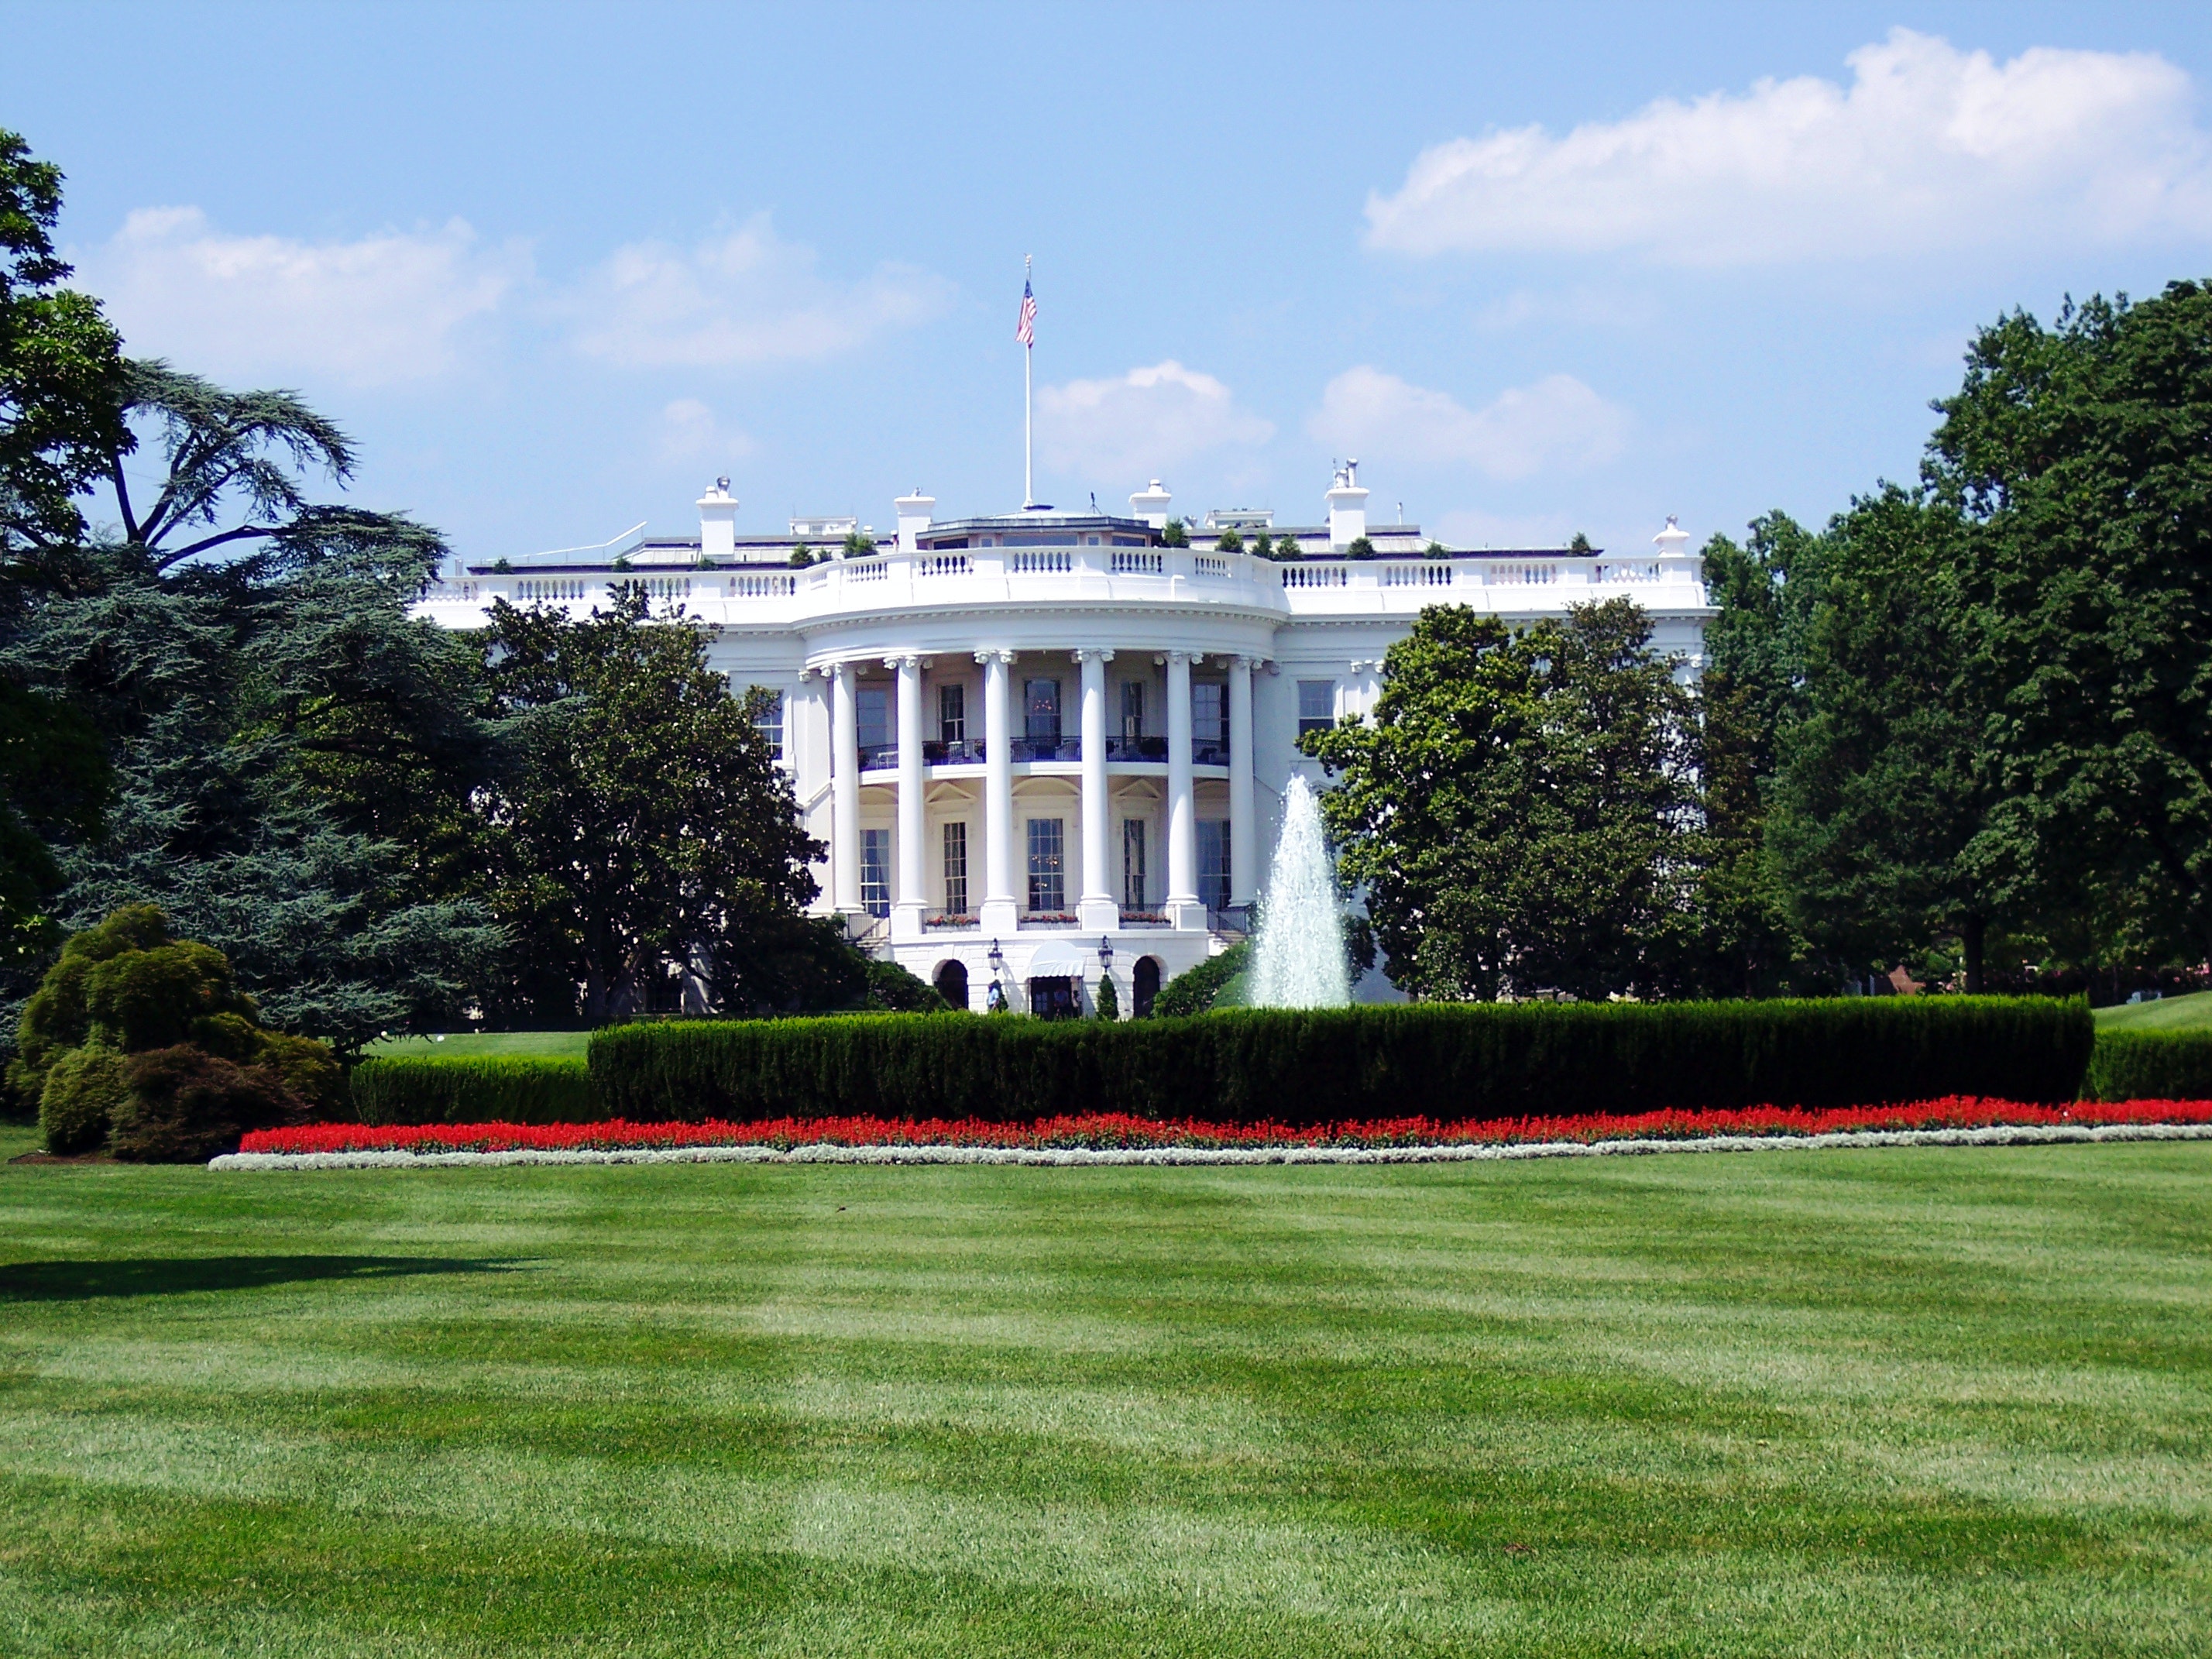 A picture of the White House, located in Washington D.C., United States